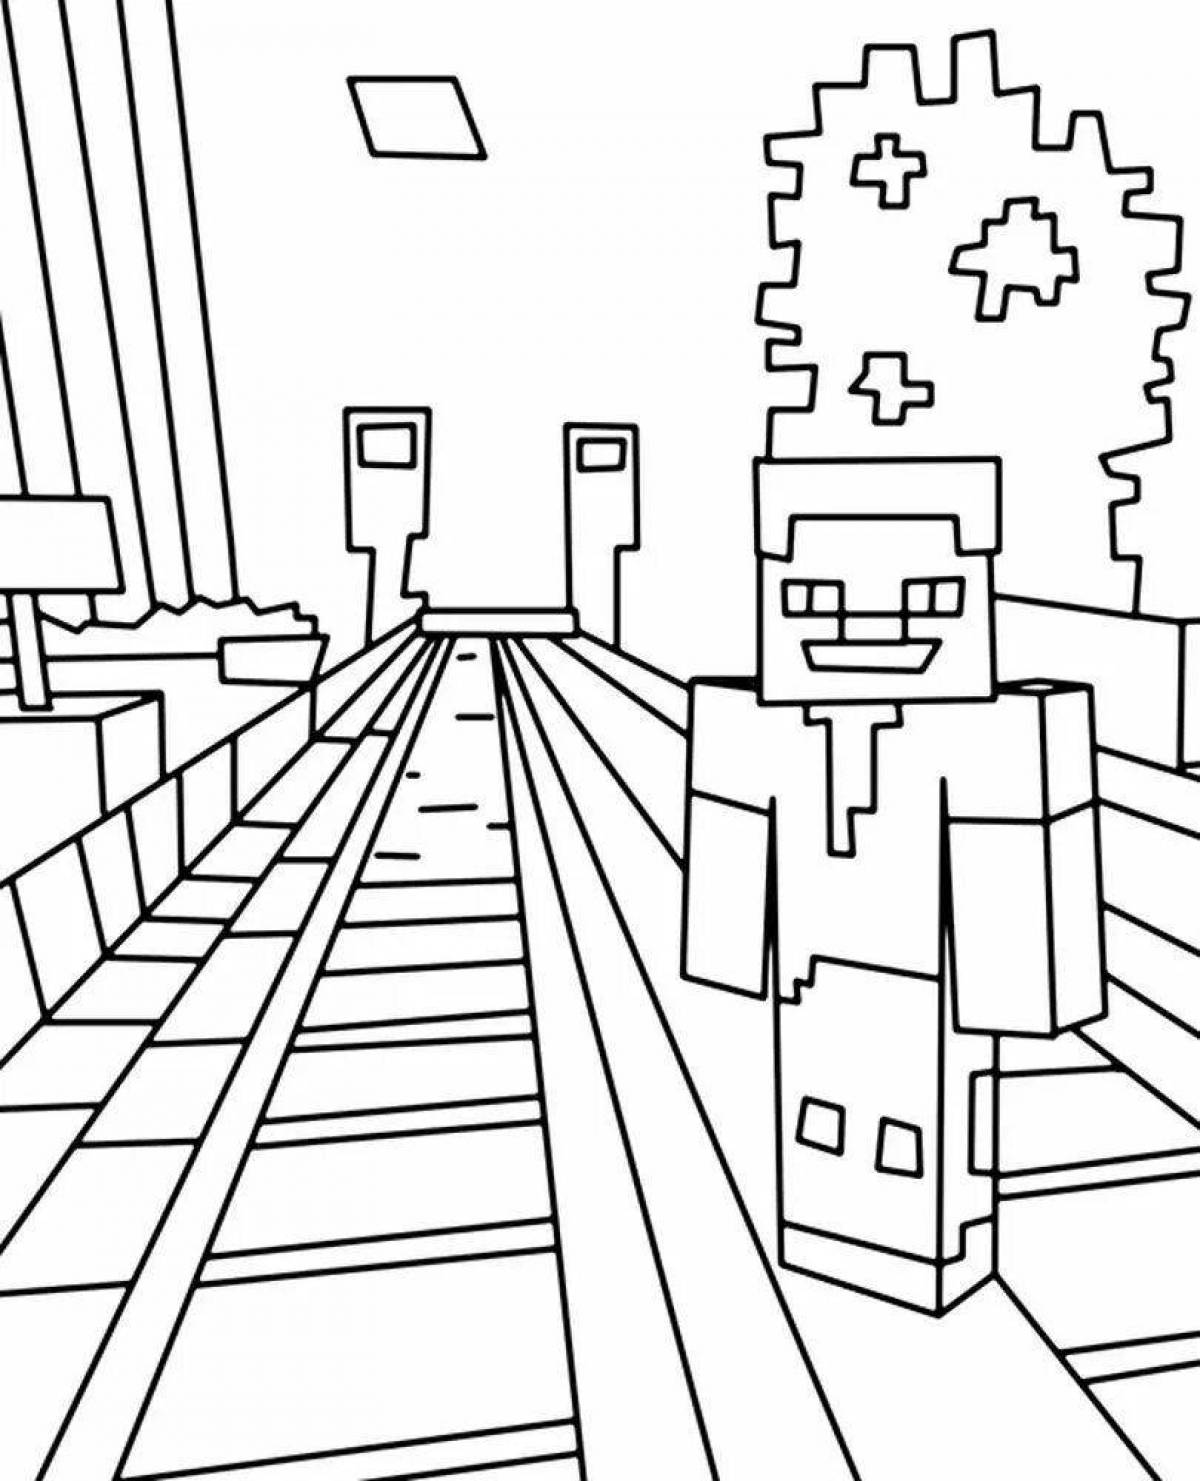 Creative minecraft ace coloring page